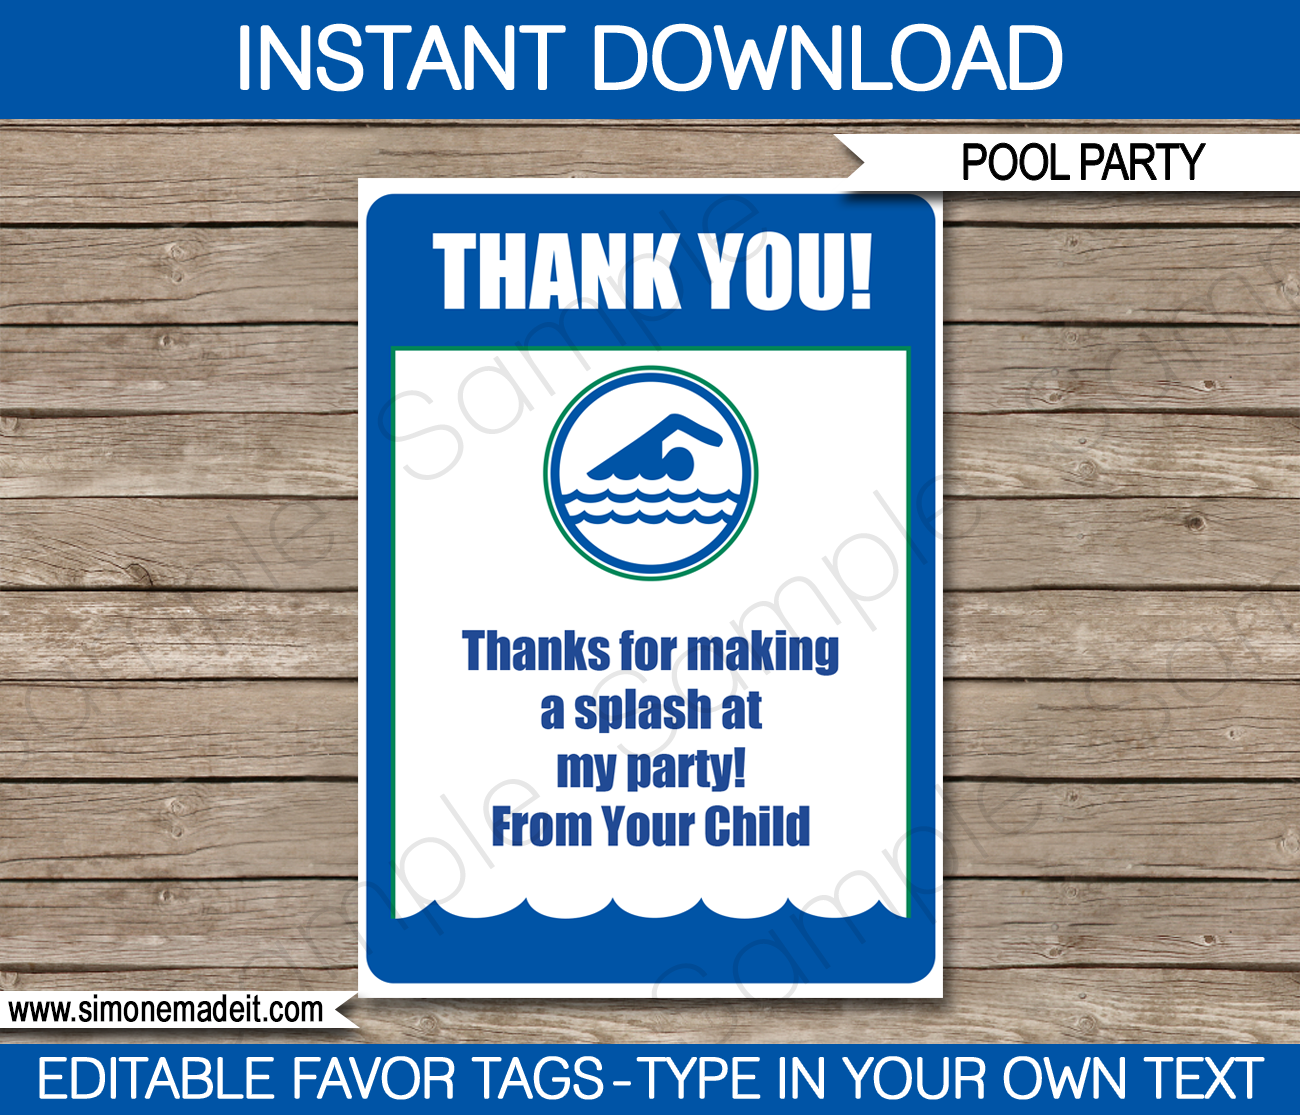 Pool Party Favor Tags | Thank You Tags | Birthday Party | Swim Club | Editable DIY Template | $3.00 INSTANT DOWNLOAD via SIMONEmadeit.com